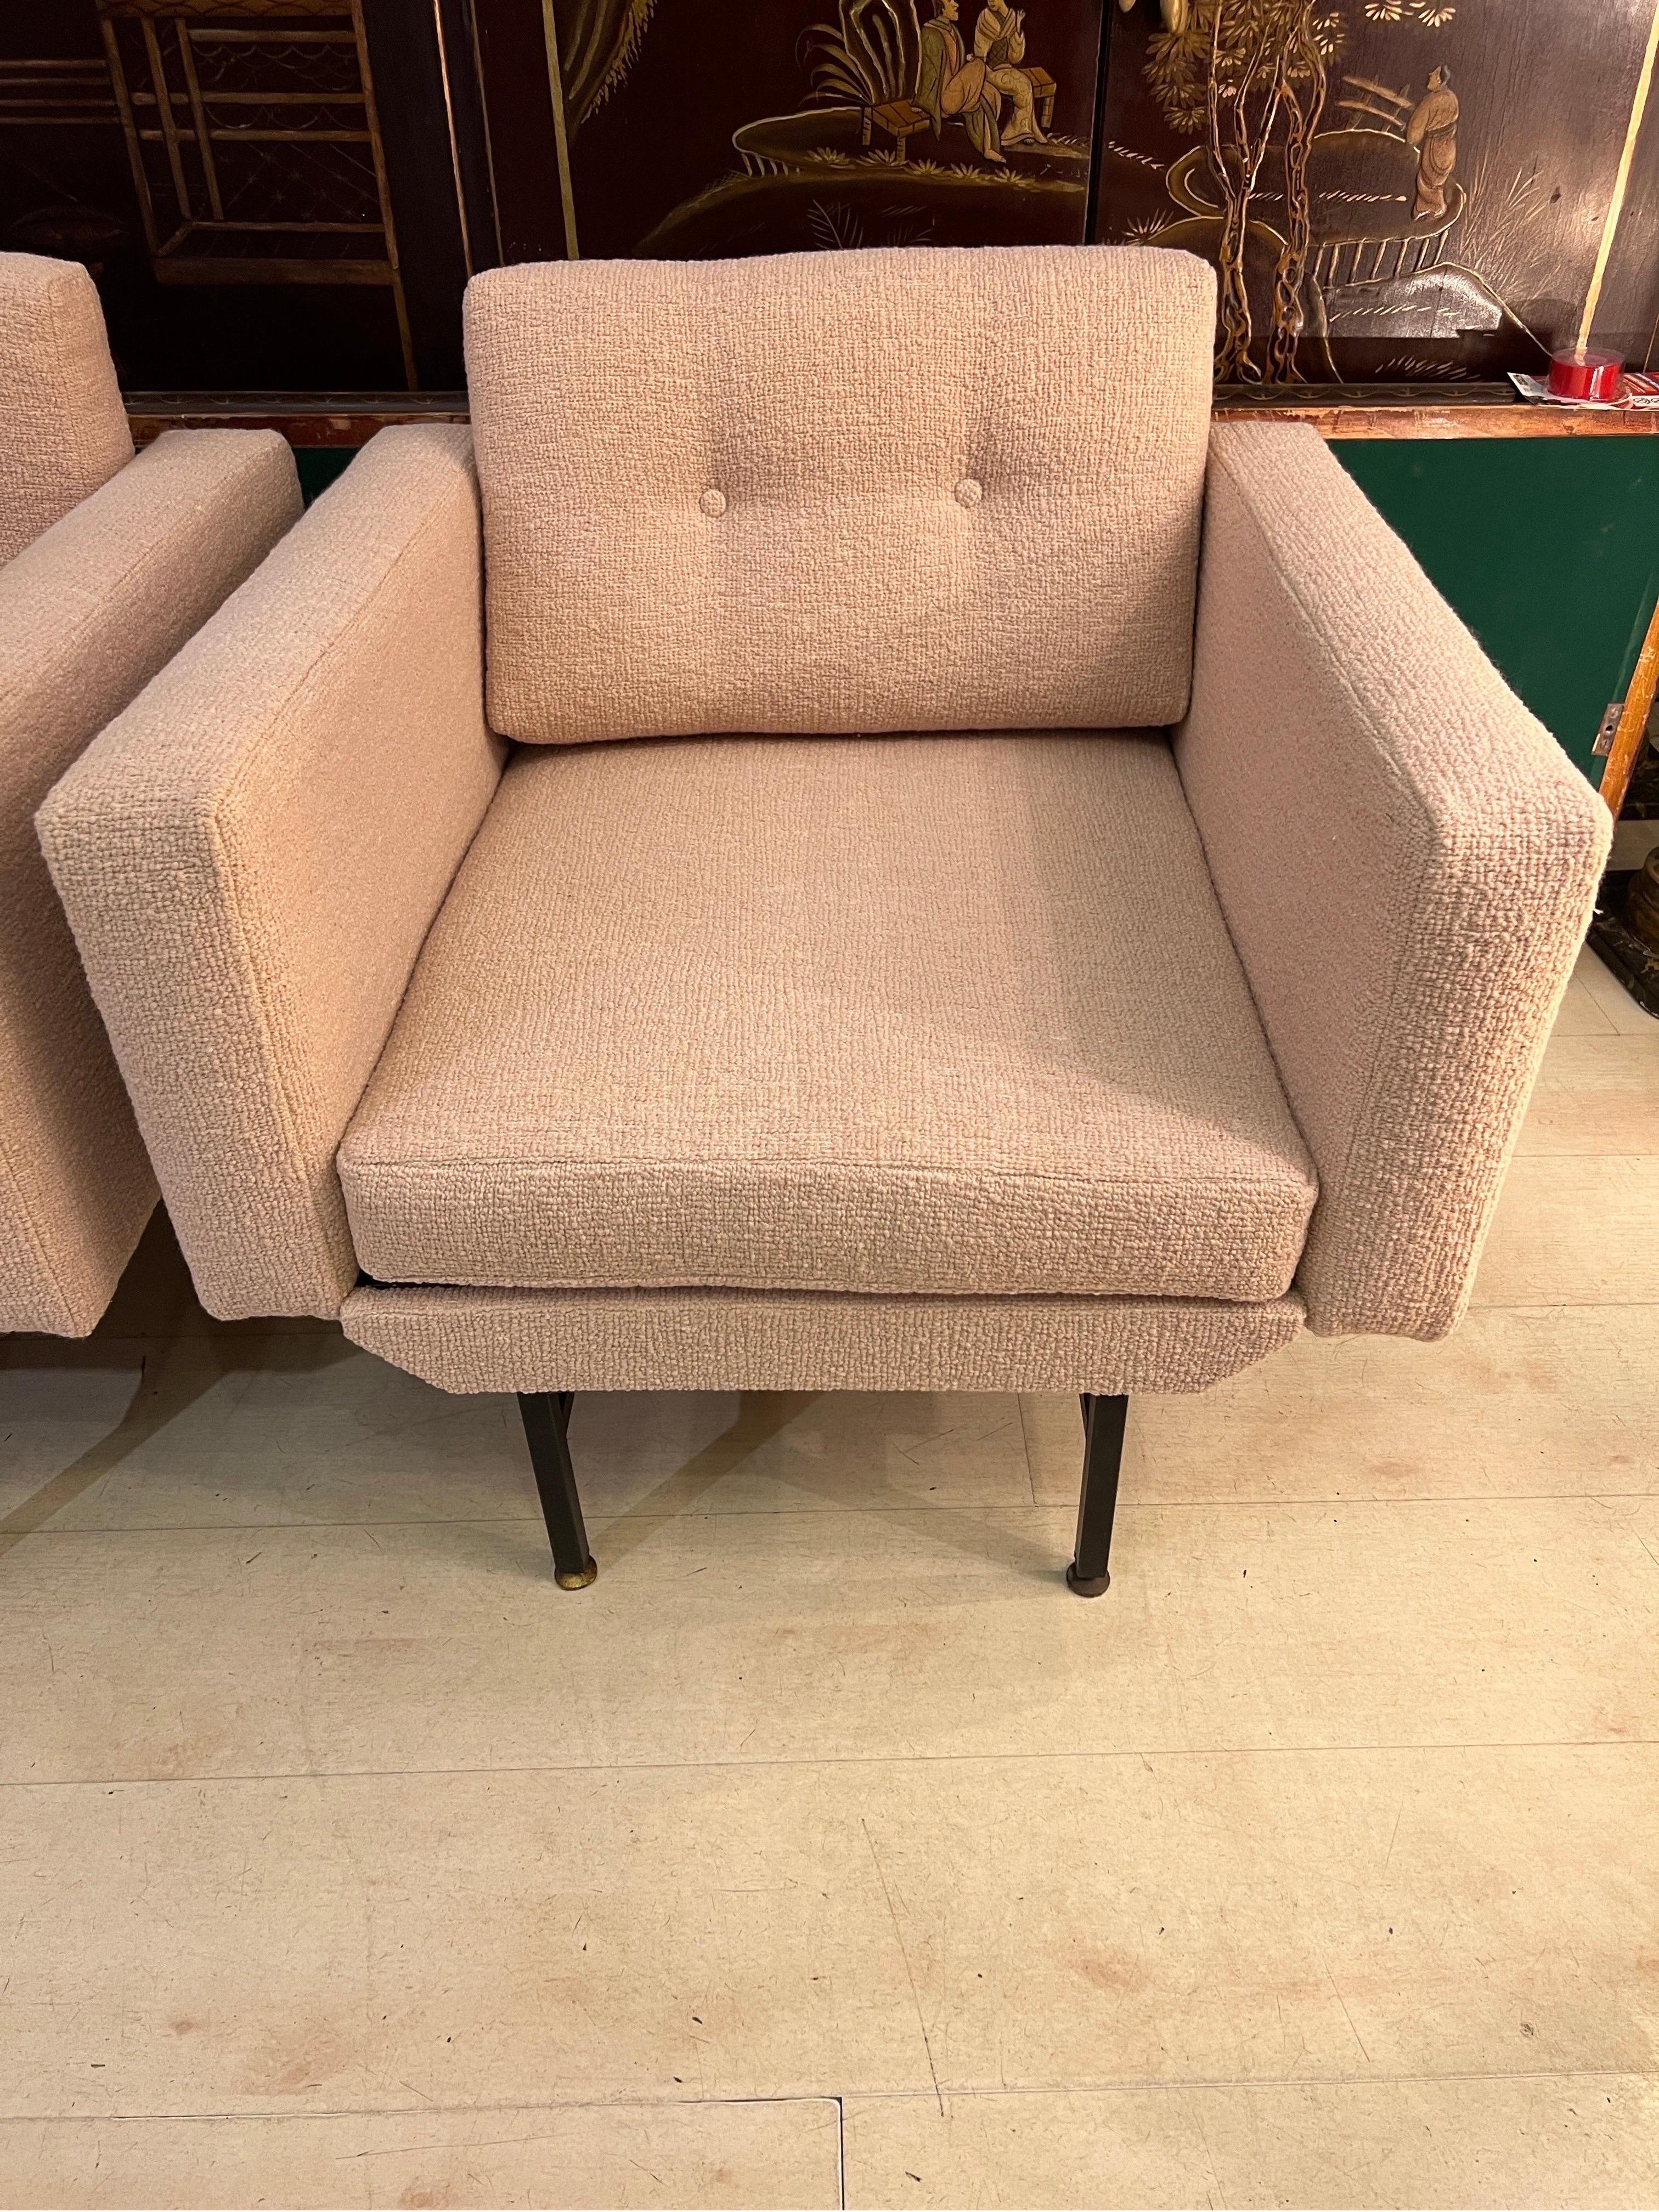 Pair of Newly Upholstered Pale Pink Bouclé Armchairs, 1950s For Sale 5